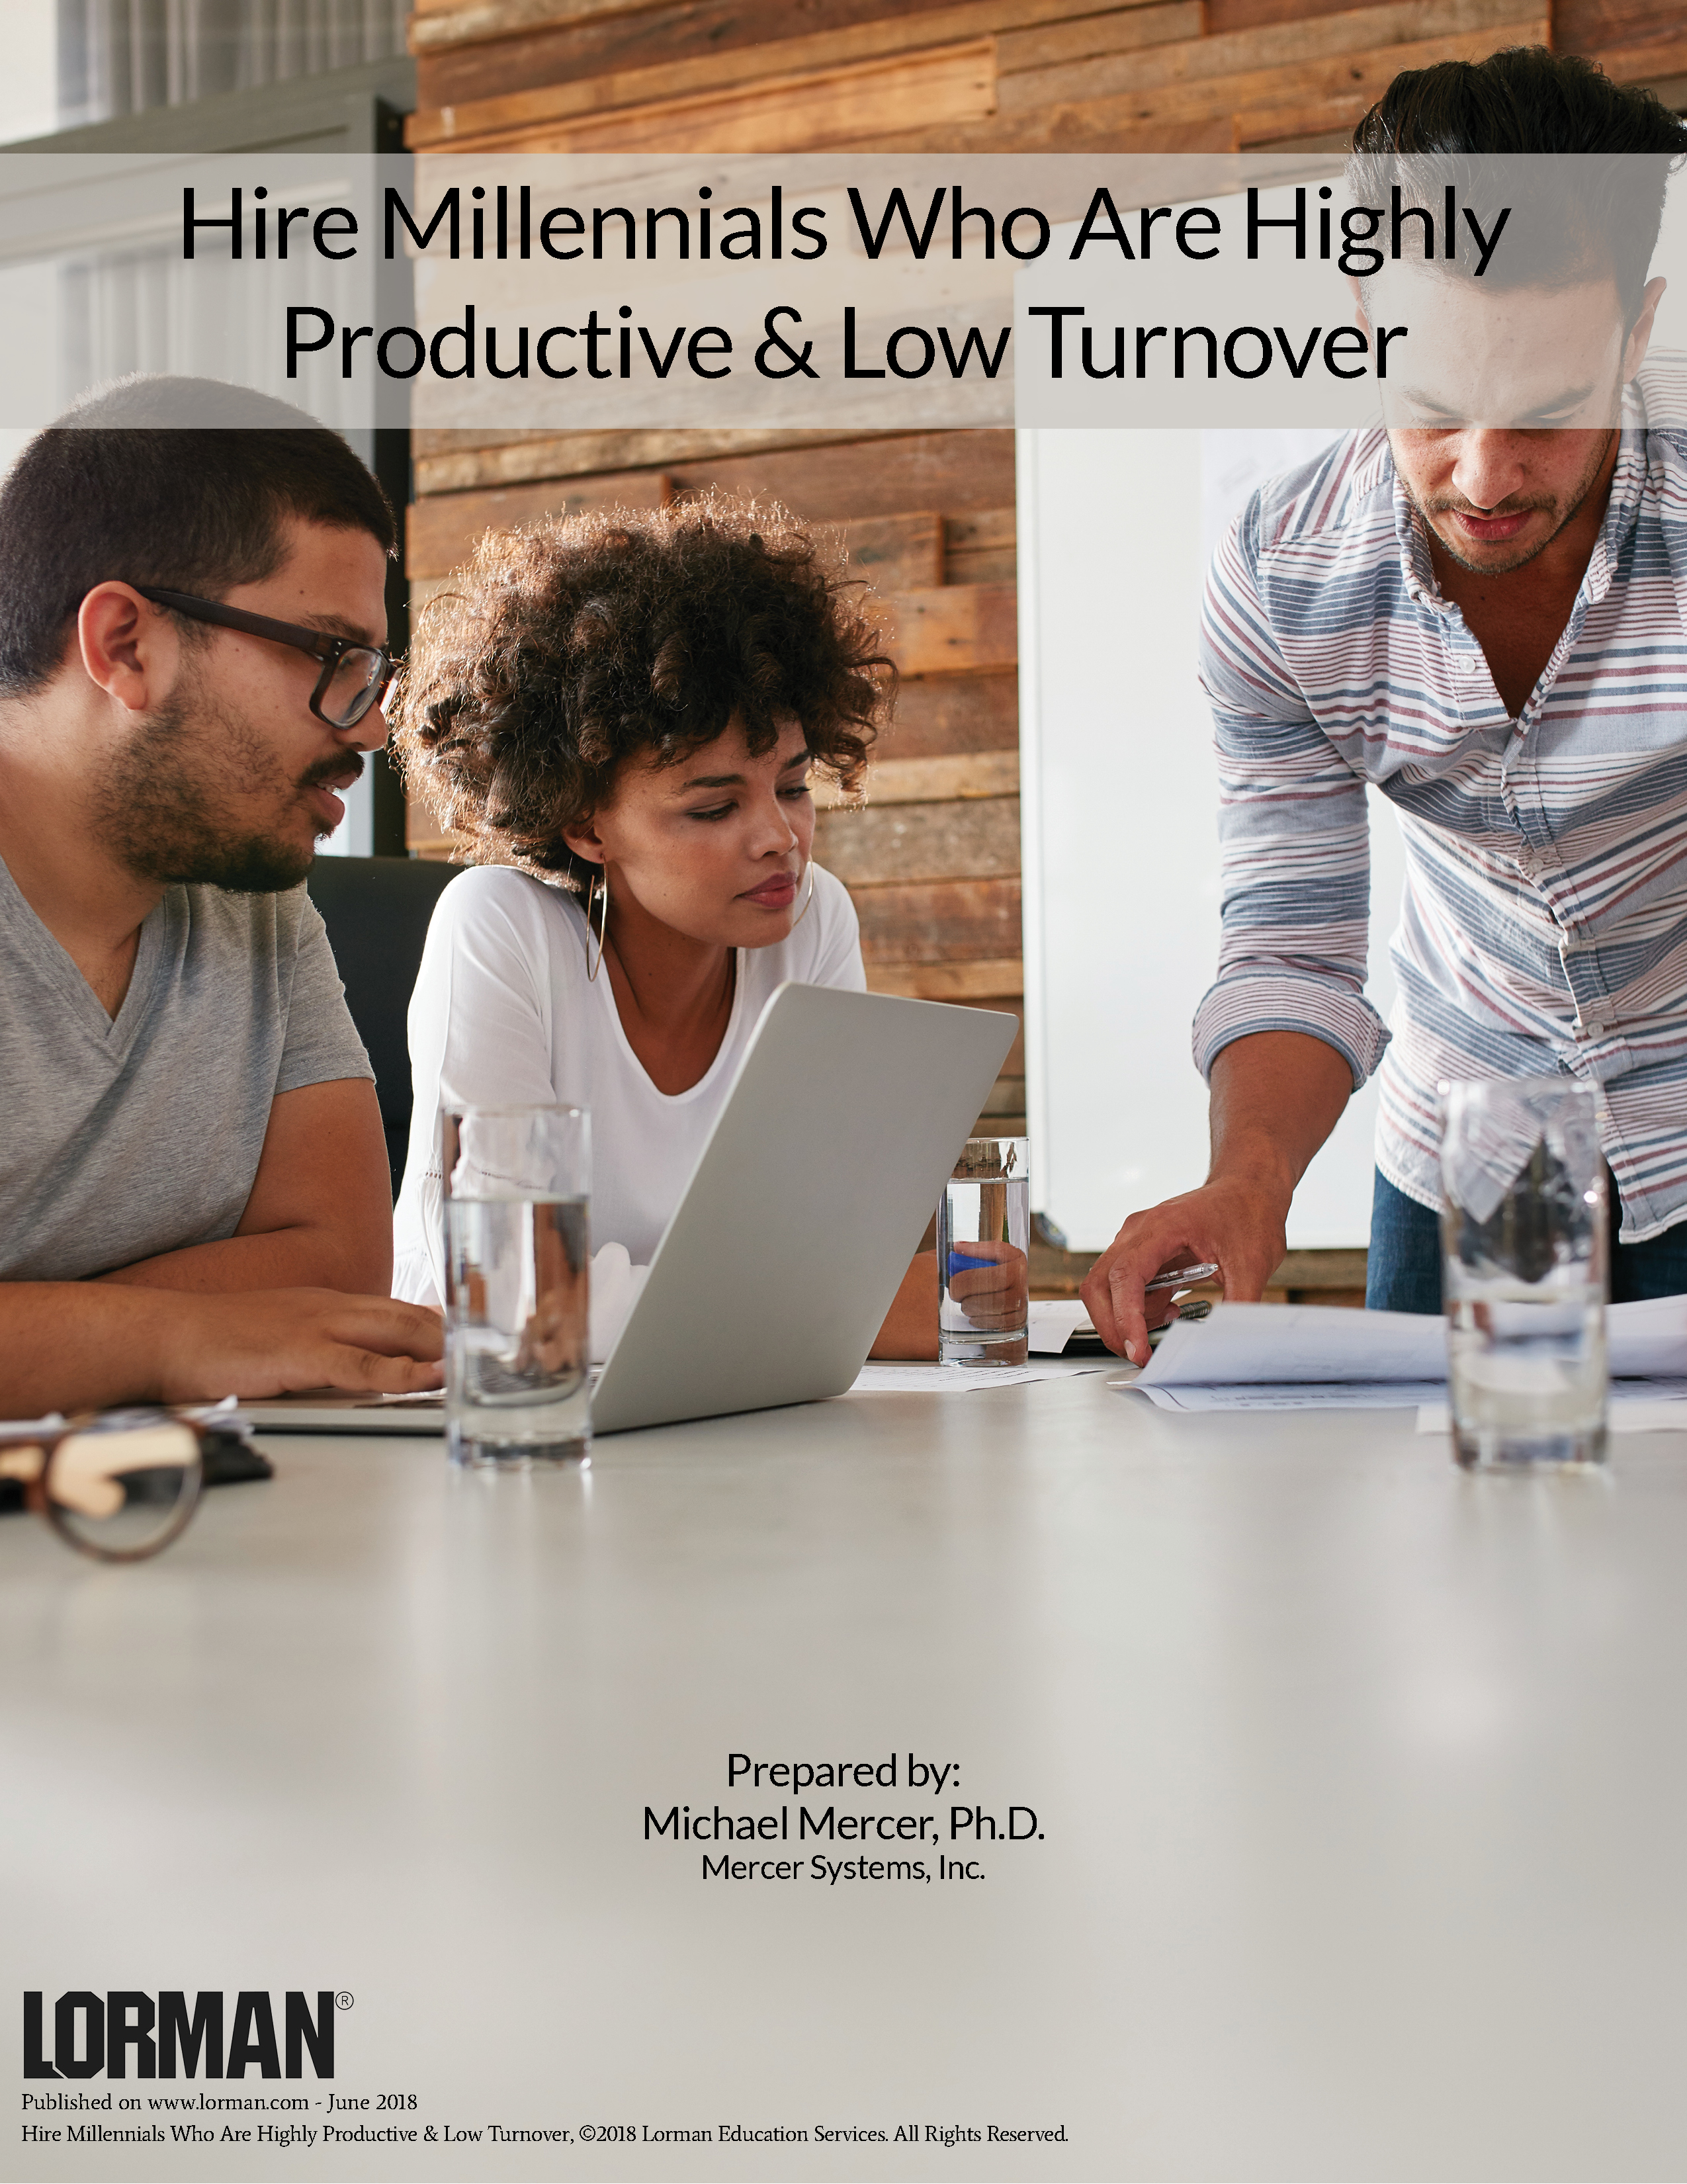 Hire Millennials Who Are Highly Productive & Low Turnover